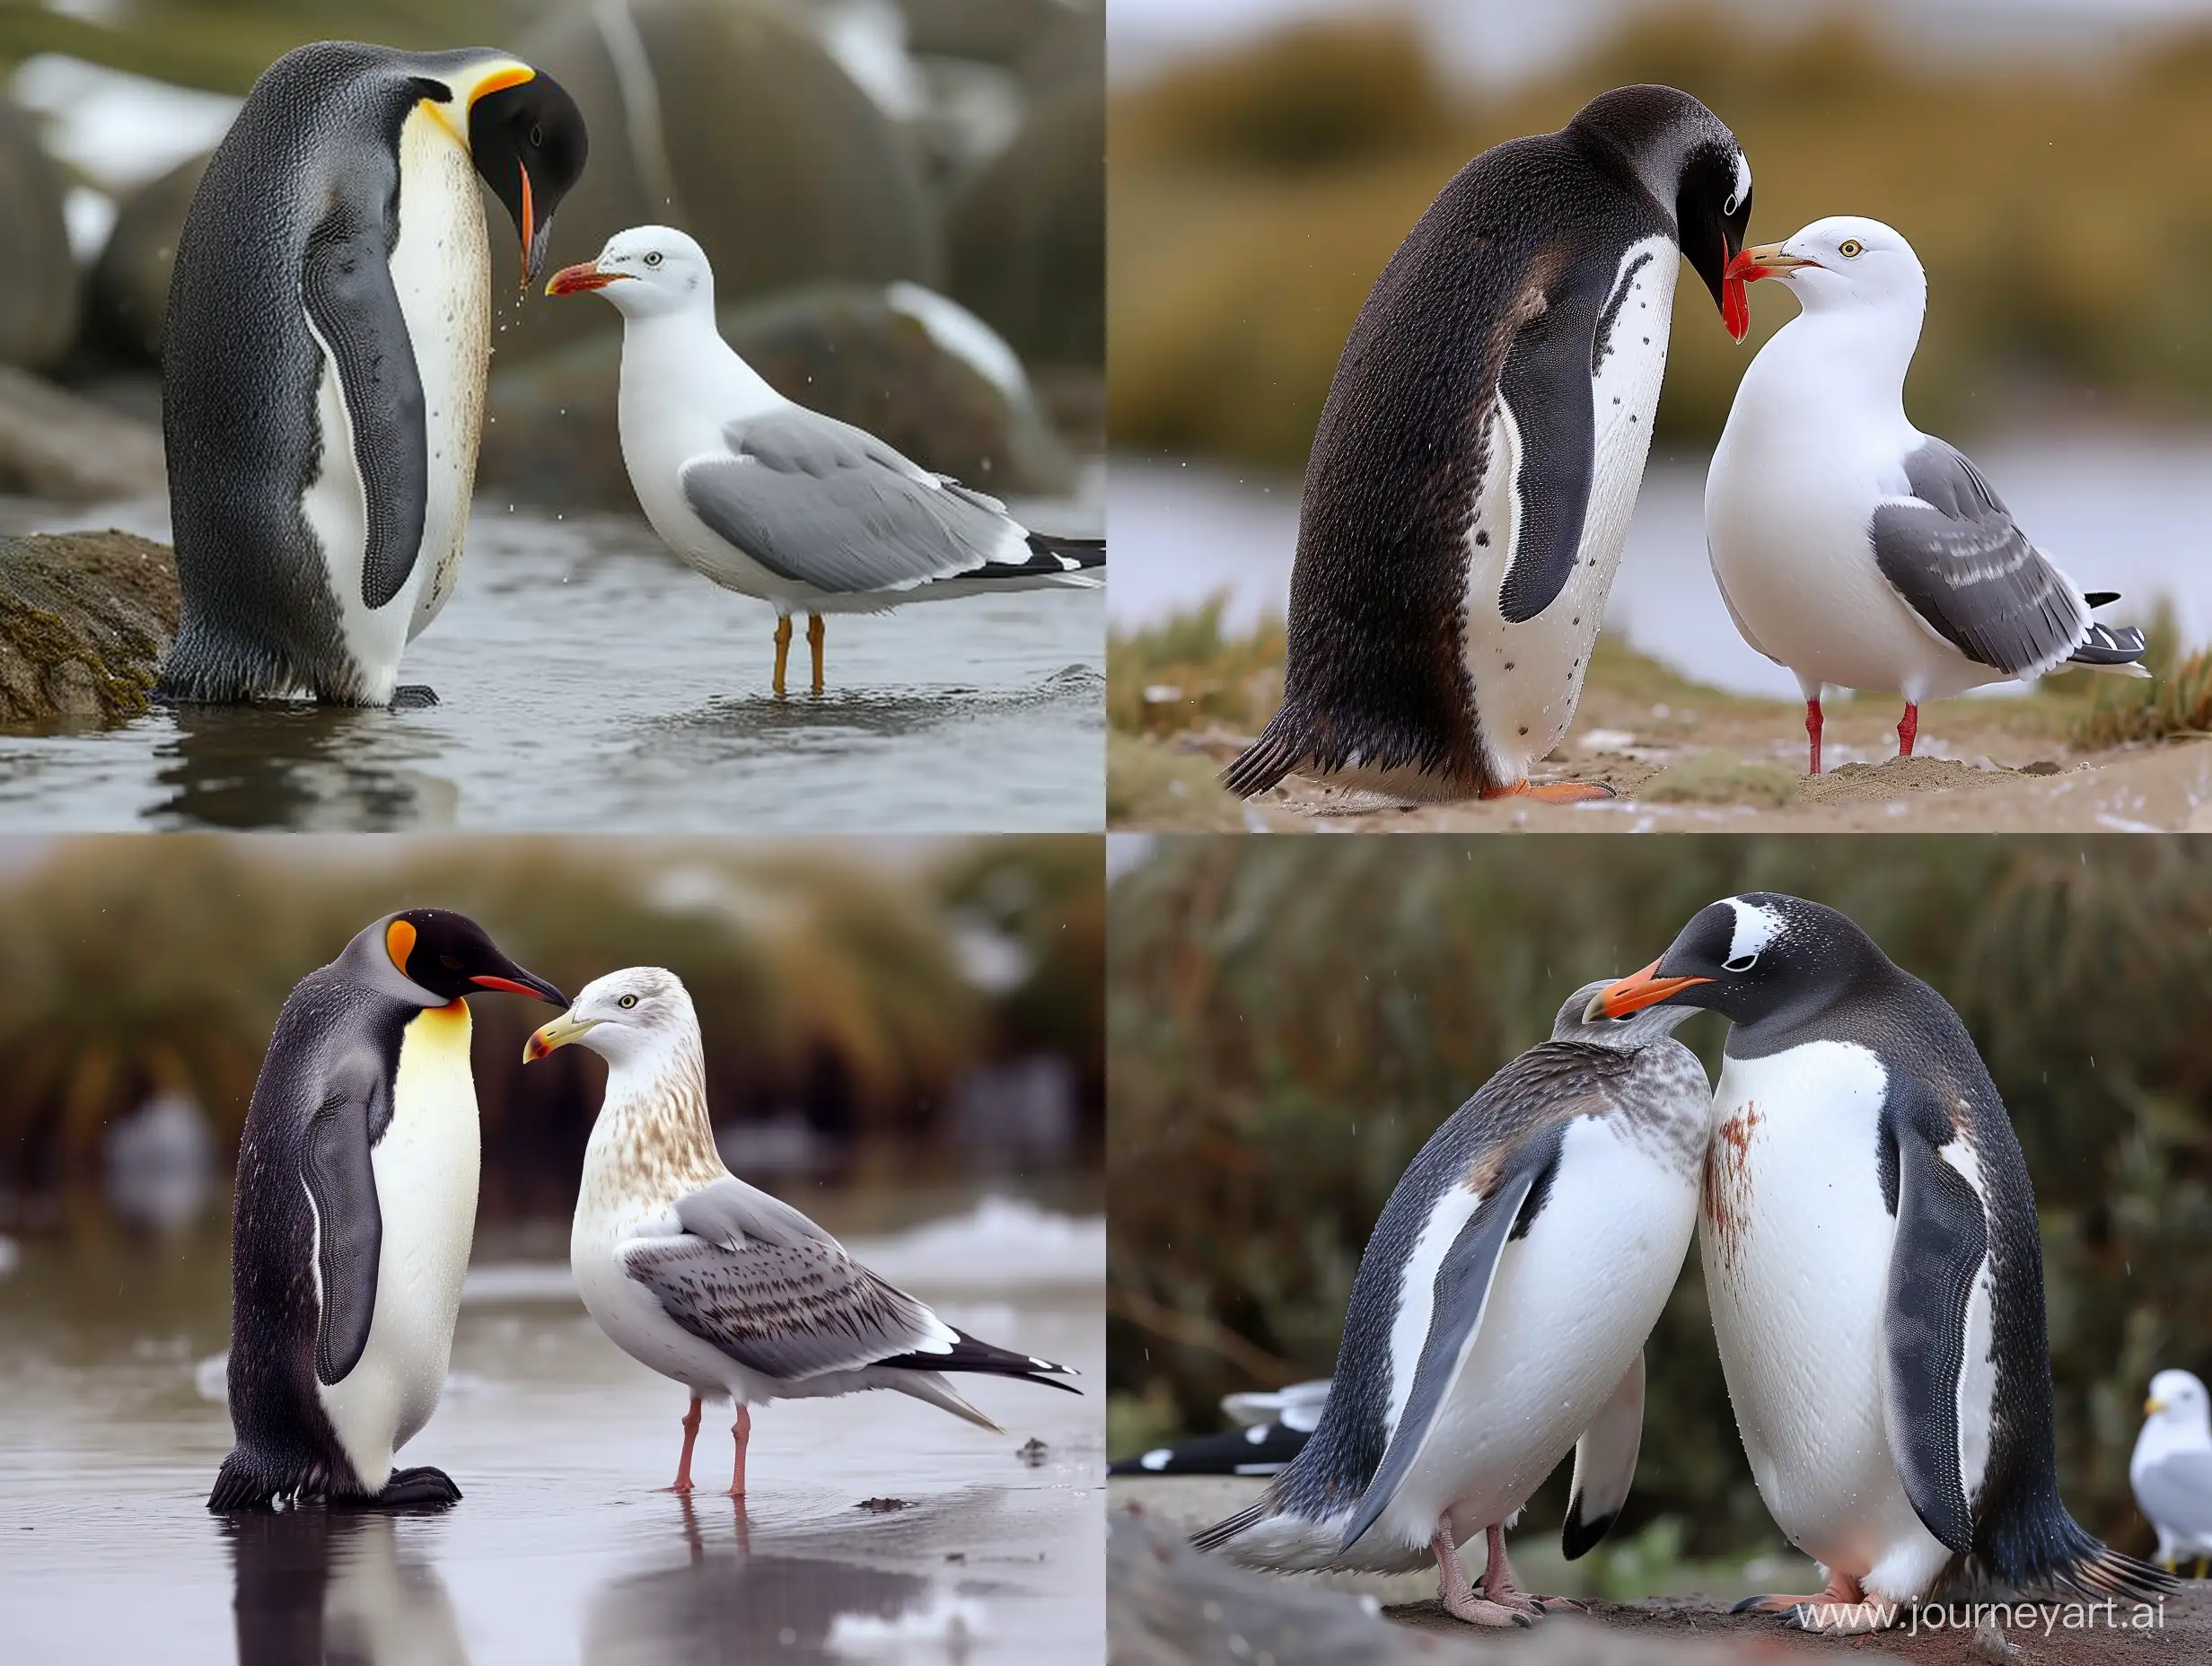 penguin and seagull love each other romantically